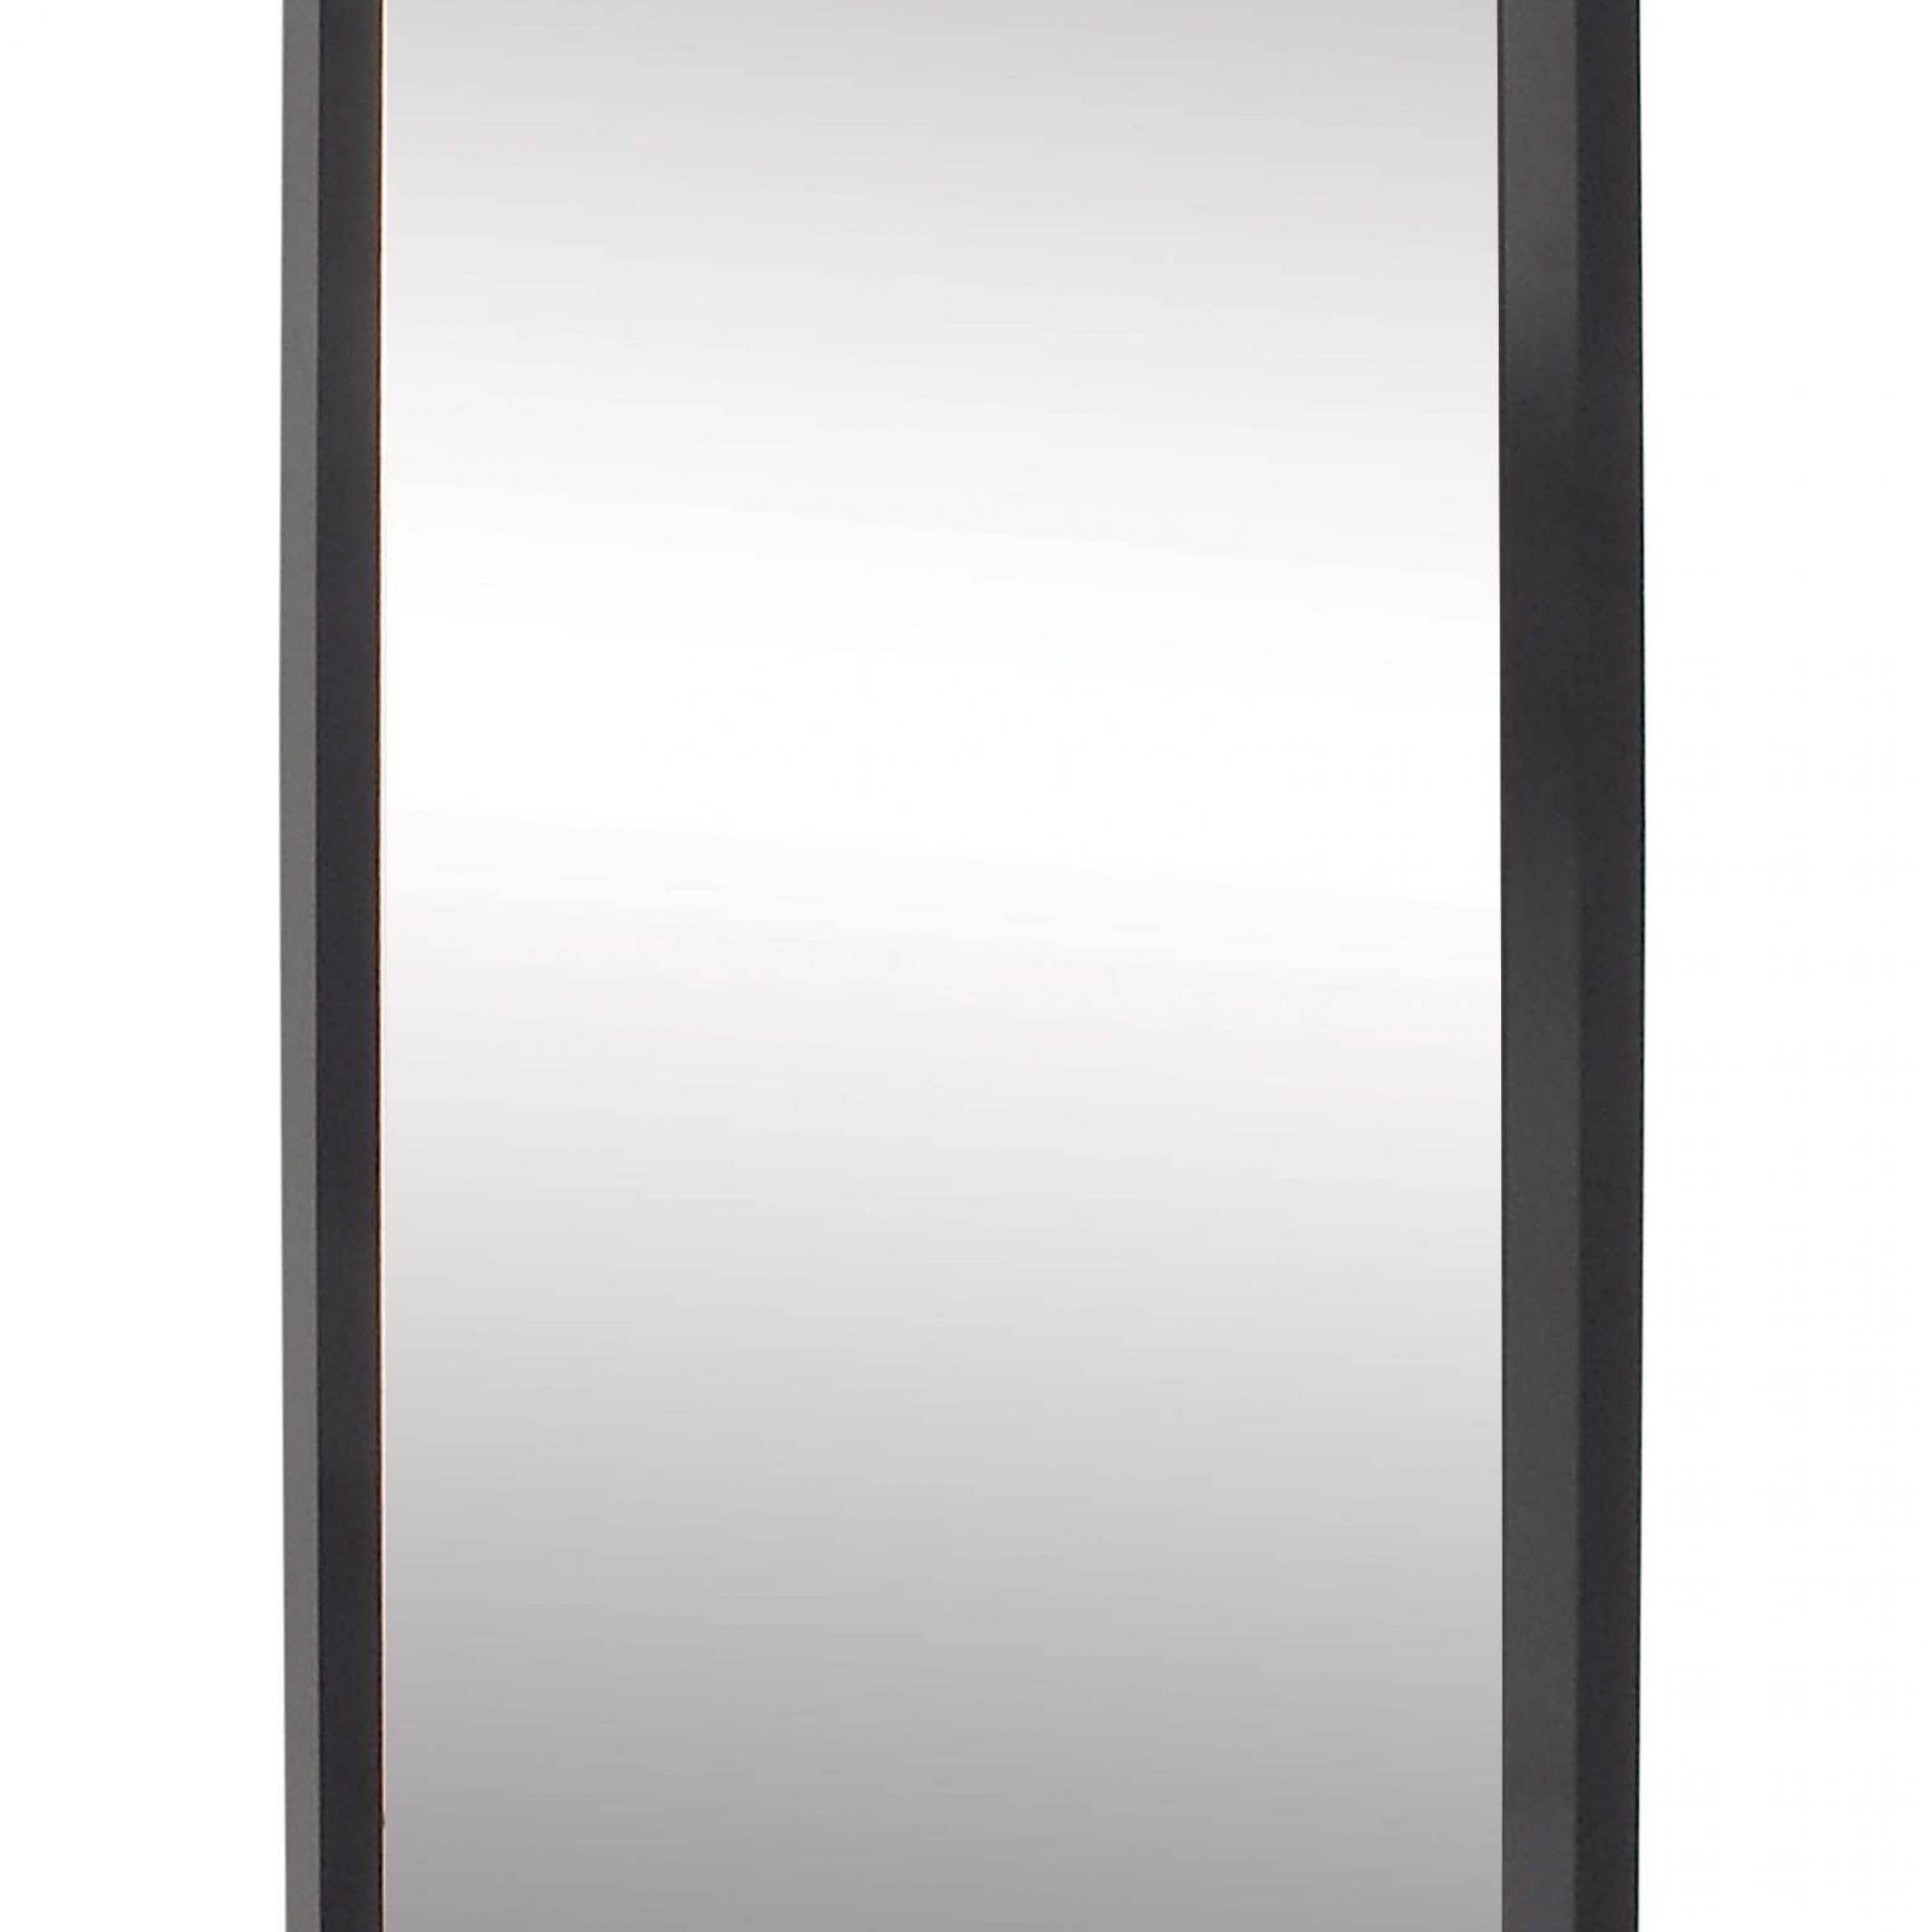 Decmode Contemporary 47 X 20 Inch Wooden Rectangular Wall Mirror, Black In Black Beaded Rectangular Wall Mirrors (View 8 of 15)